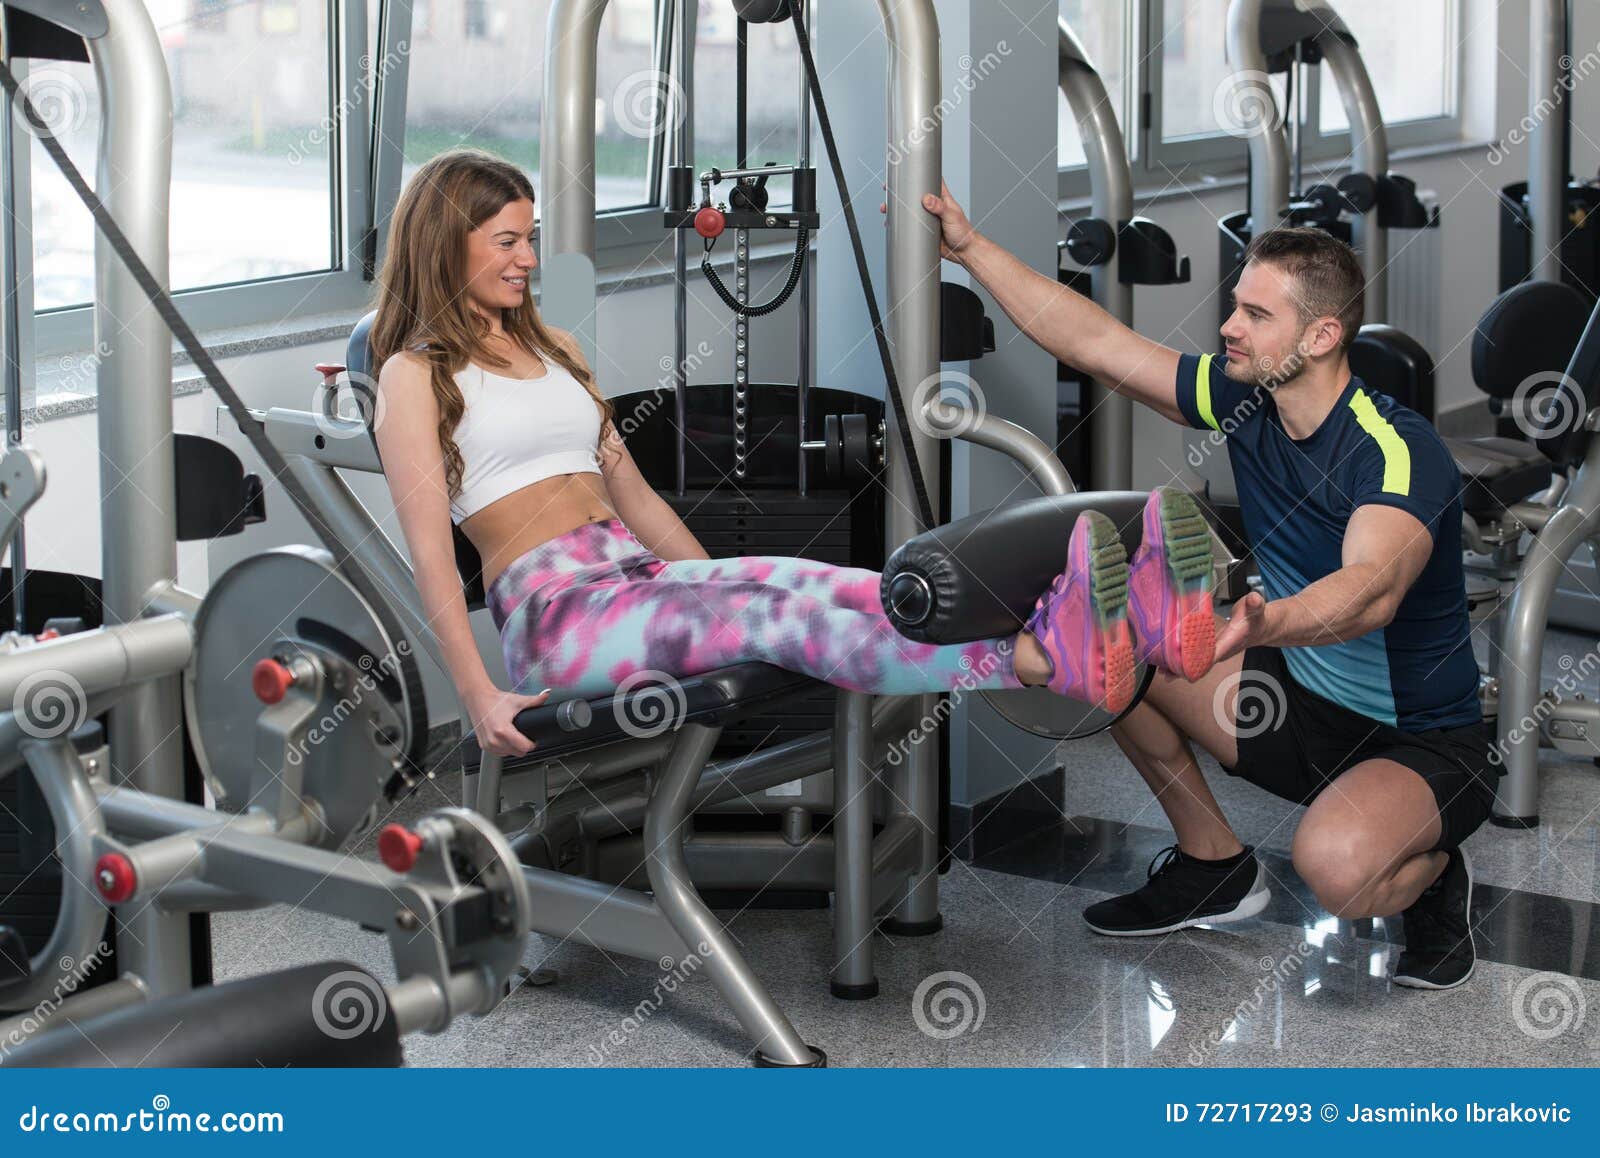 Gym Coach Helping Woman on Legs Stock Image - Image of action, power ...